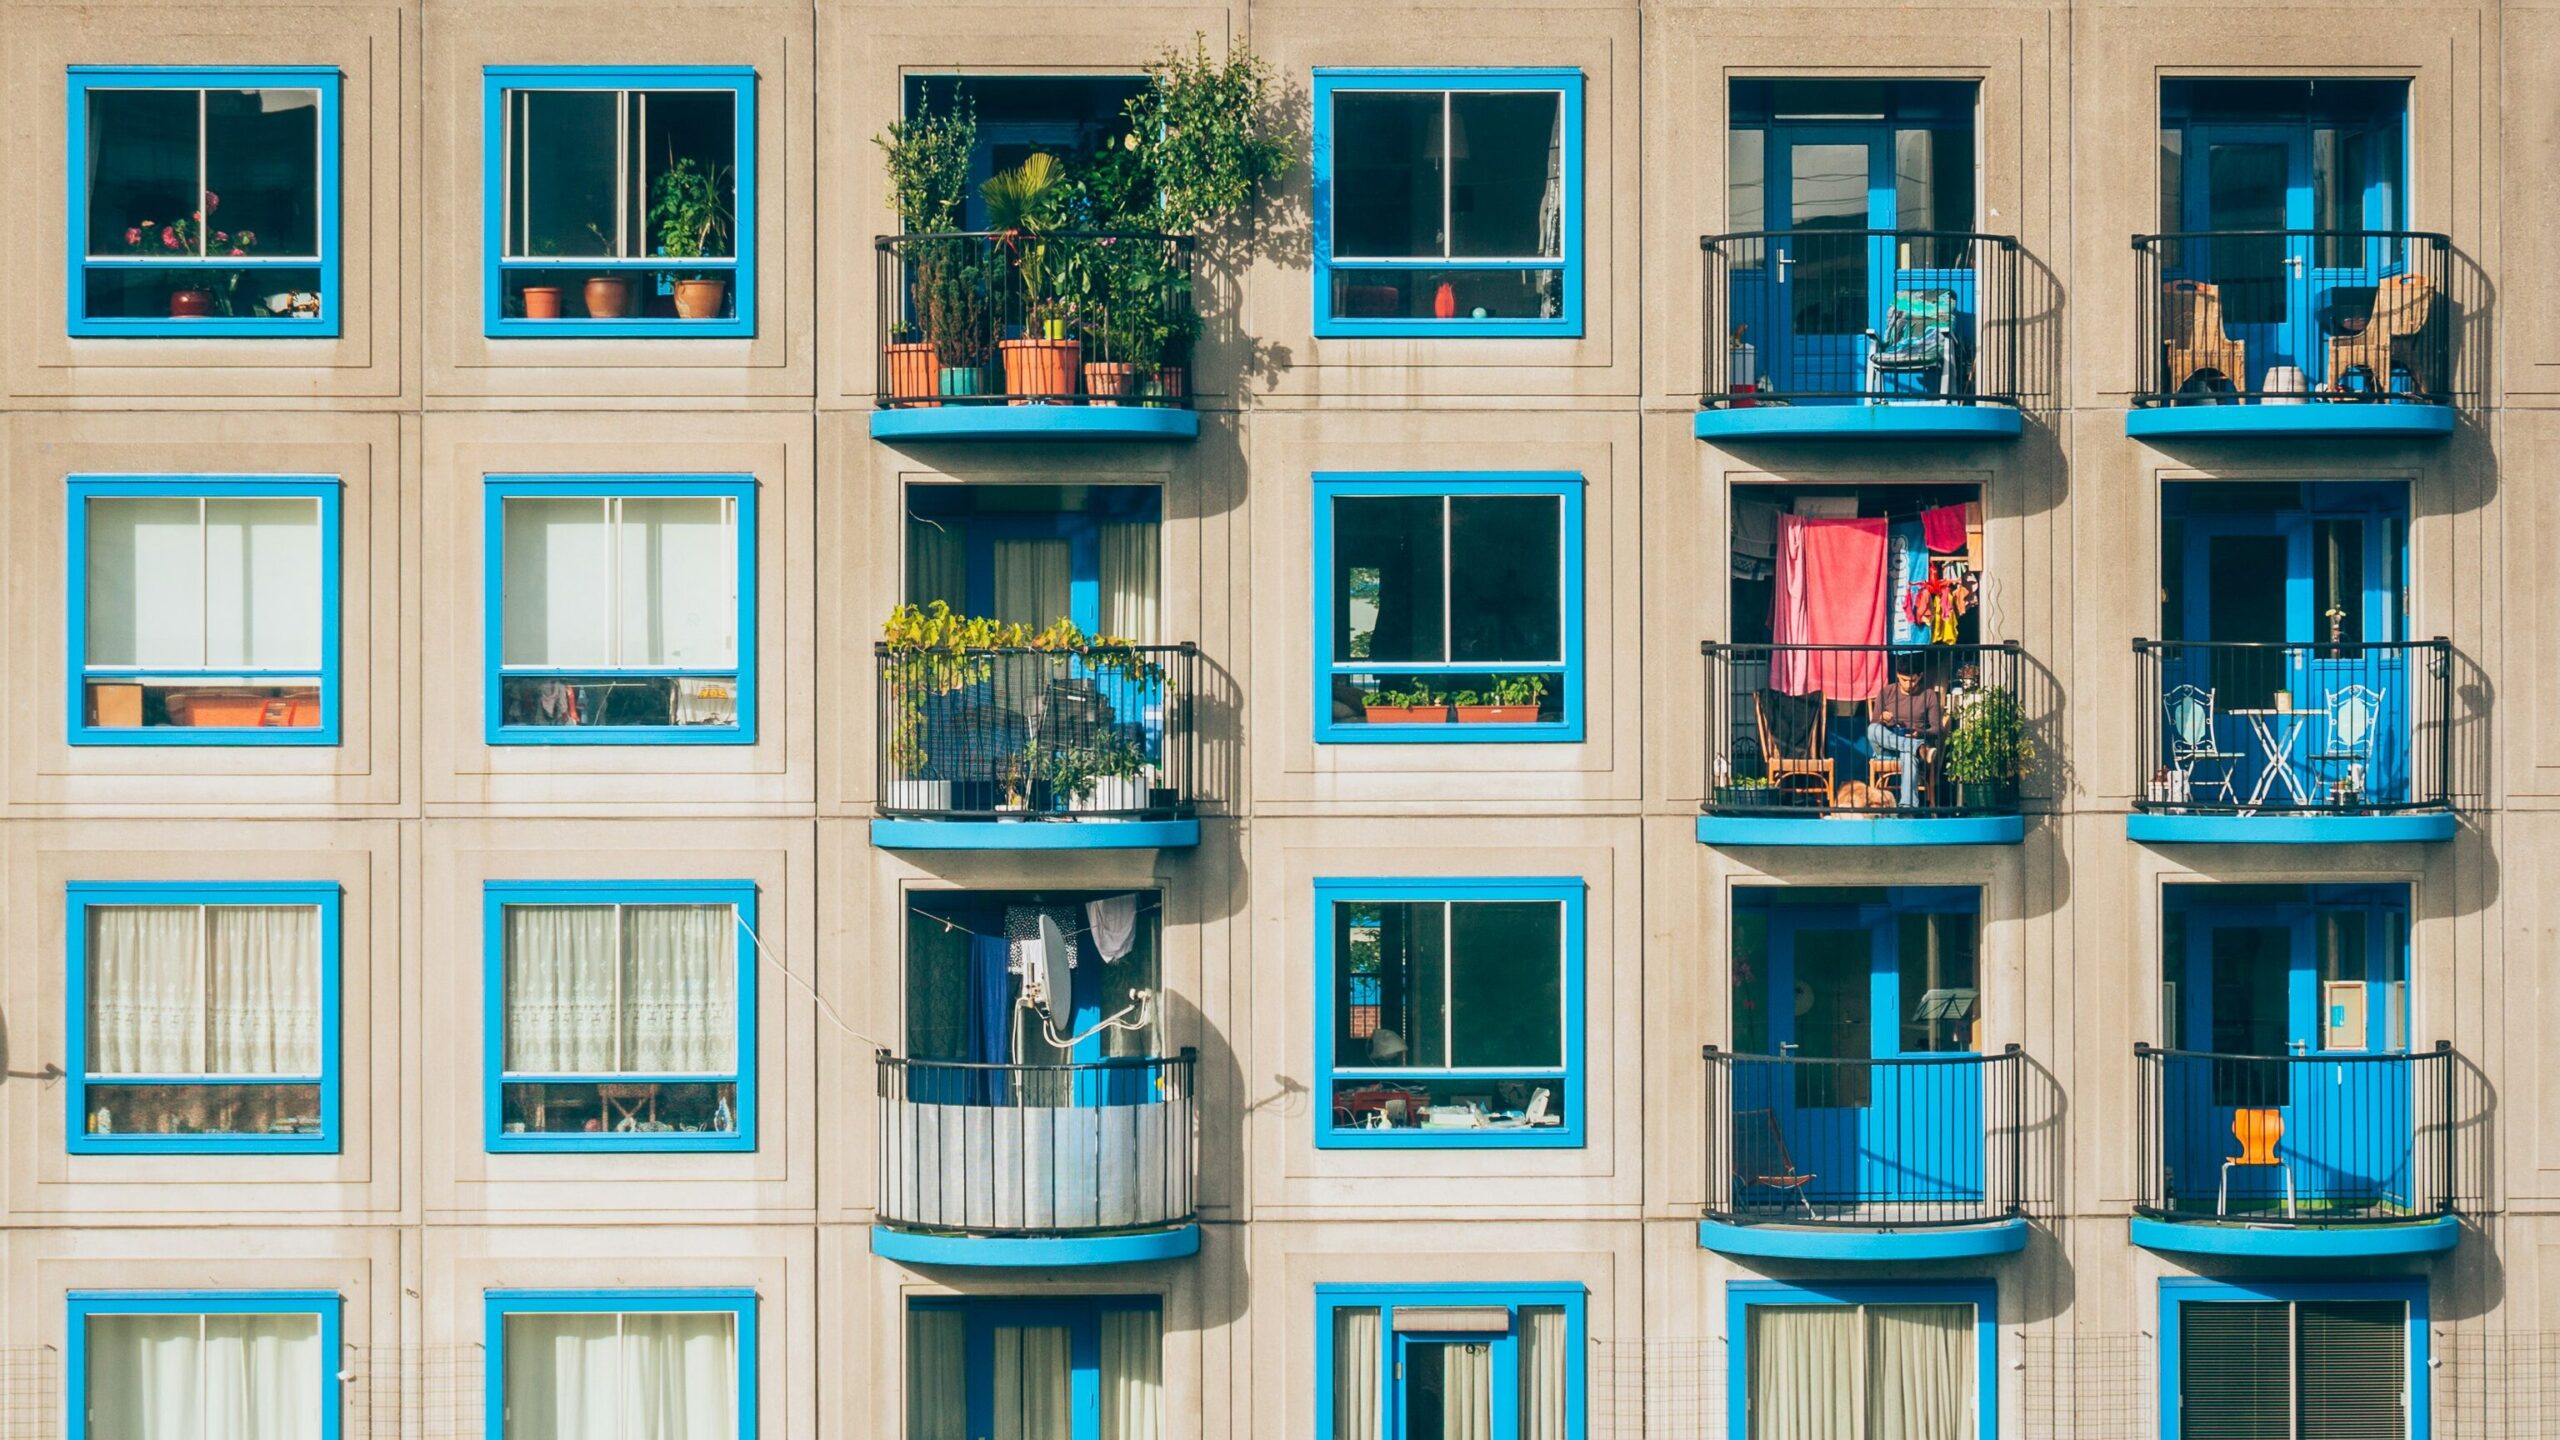 ai in property management beige facade building with baby blue window trims and balconies with plants-types of liens article